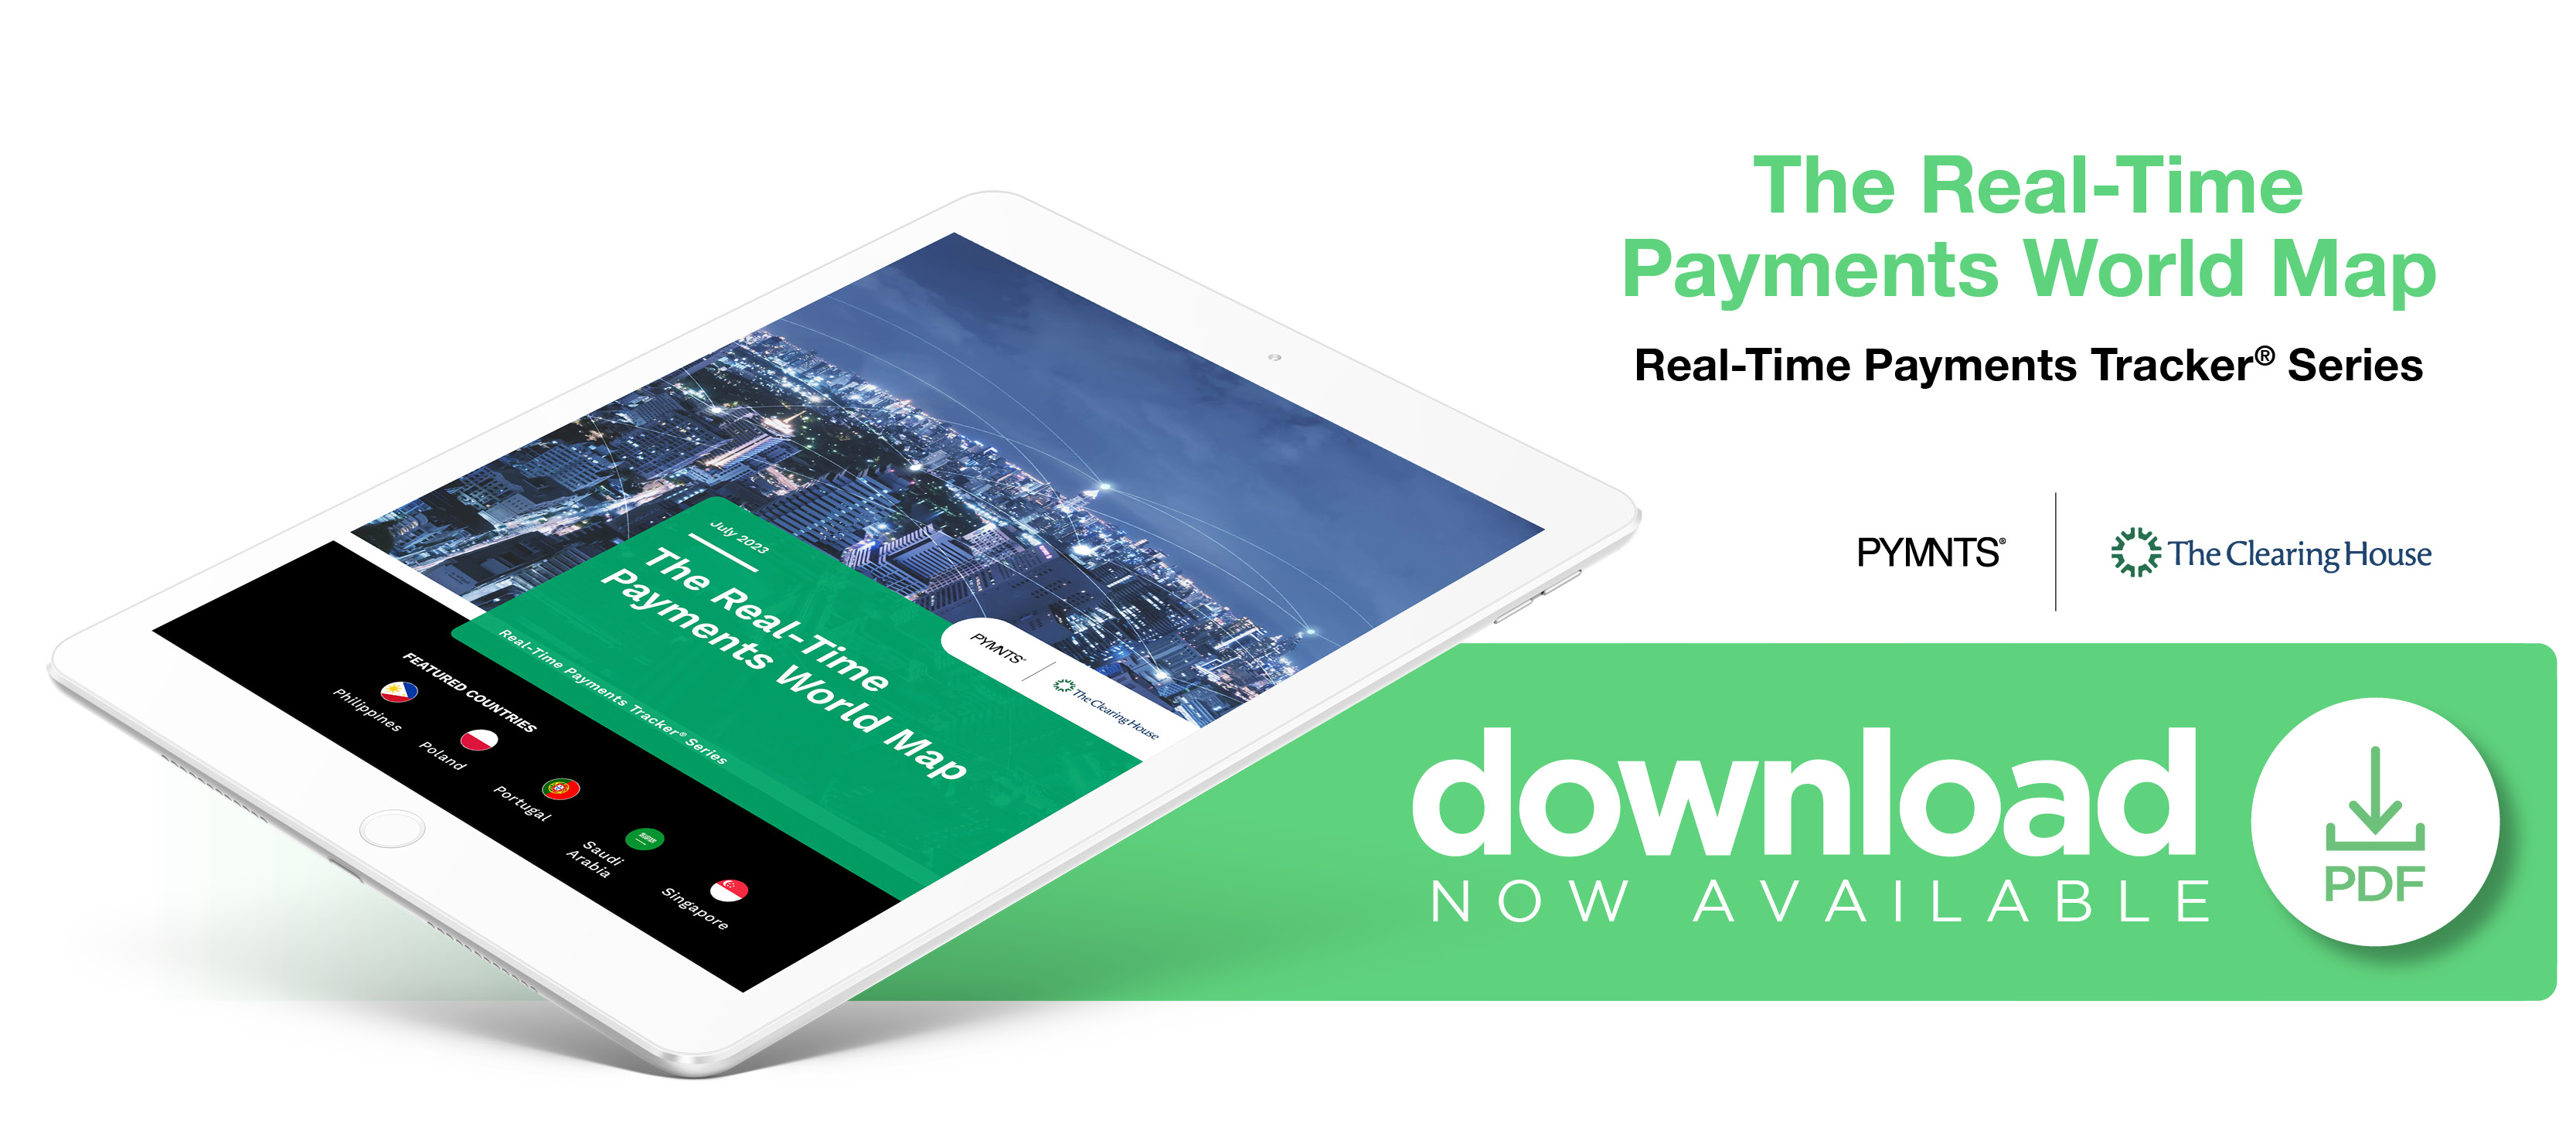 The Real-Time Payments World Map explores real-time payments worldwide. This edition features the Philippines, Saudi Arabia, Poland, Portugal and Singapore.